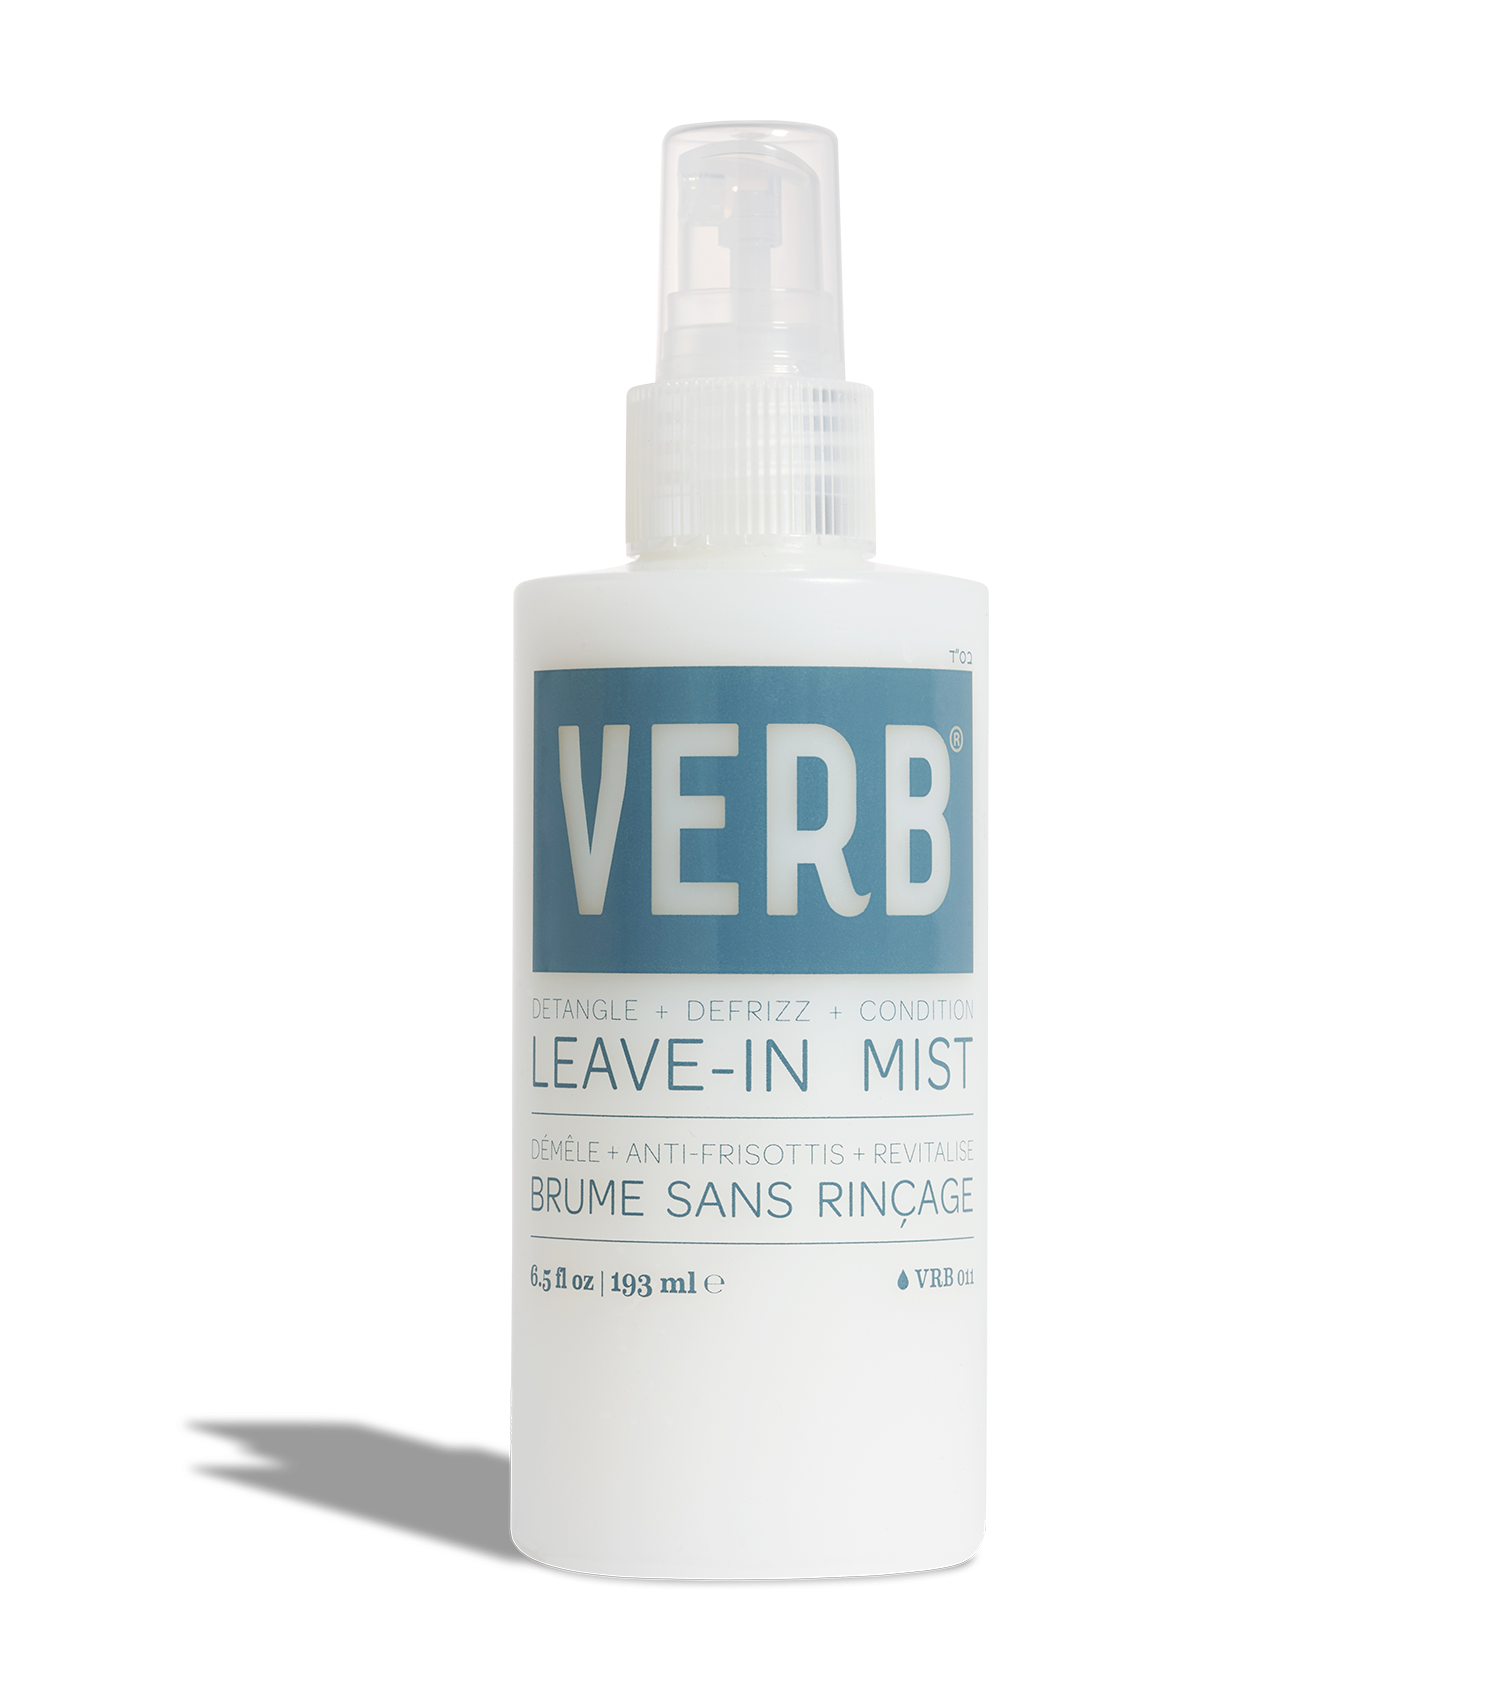 Verb Leave-in Conditioning Mist